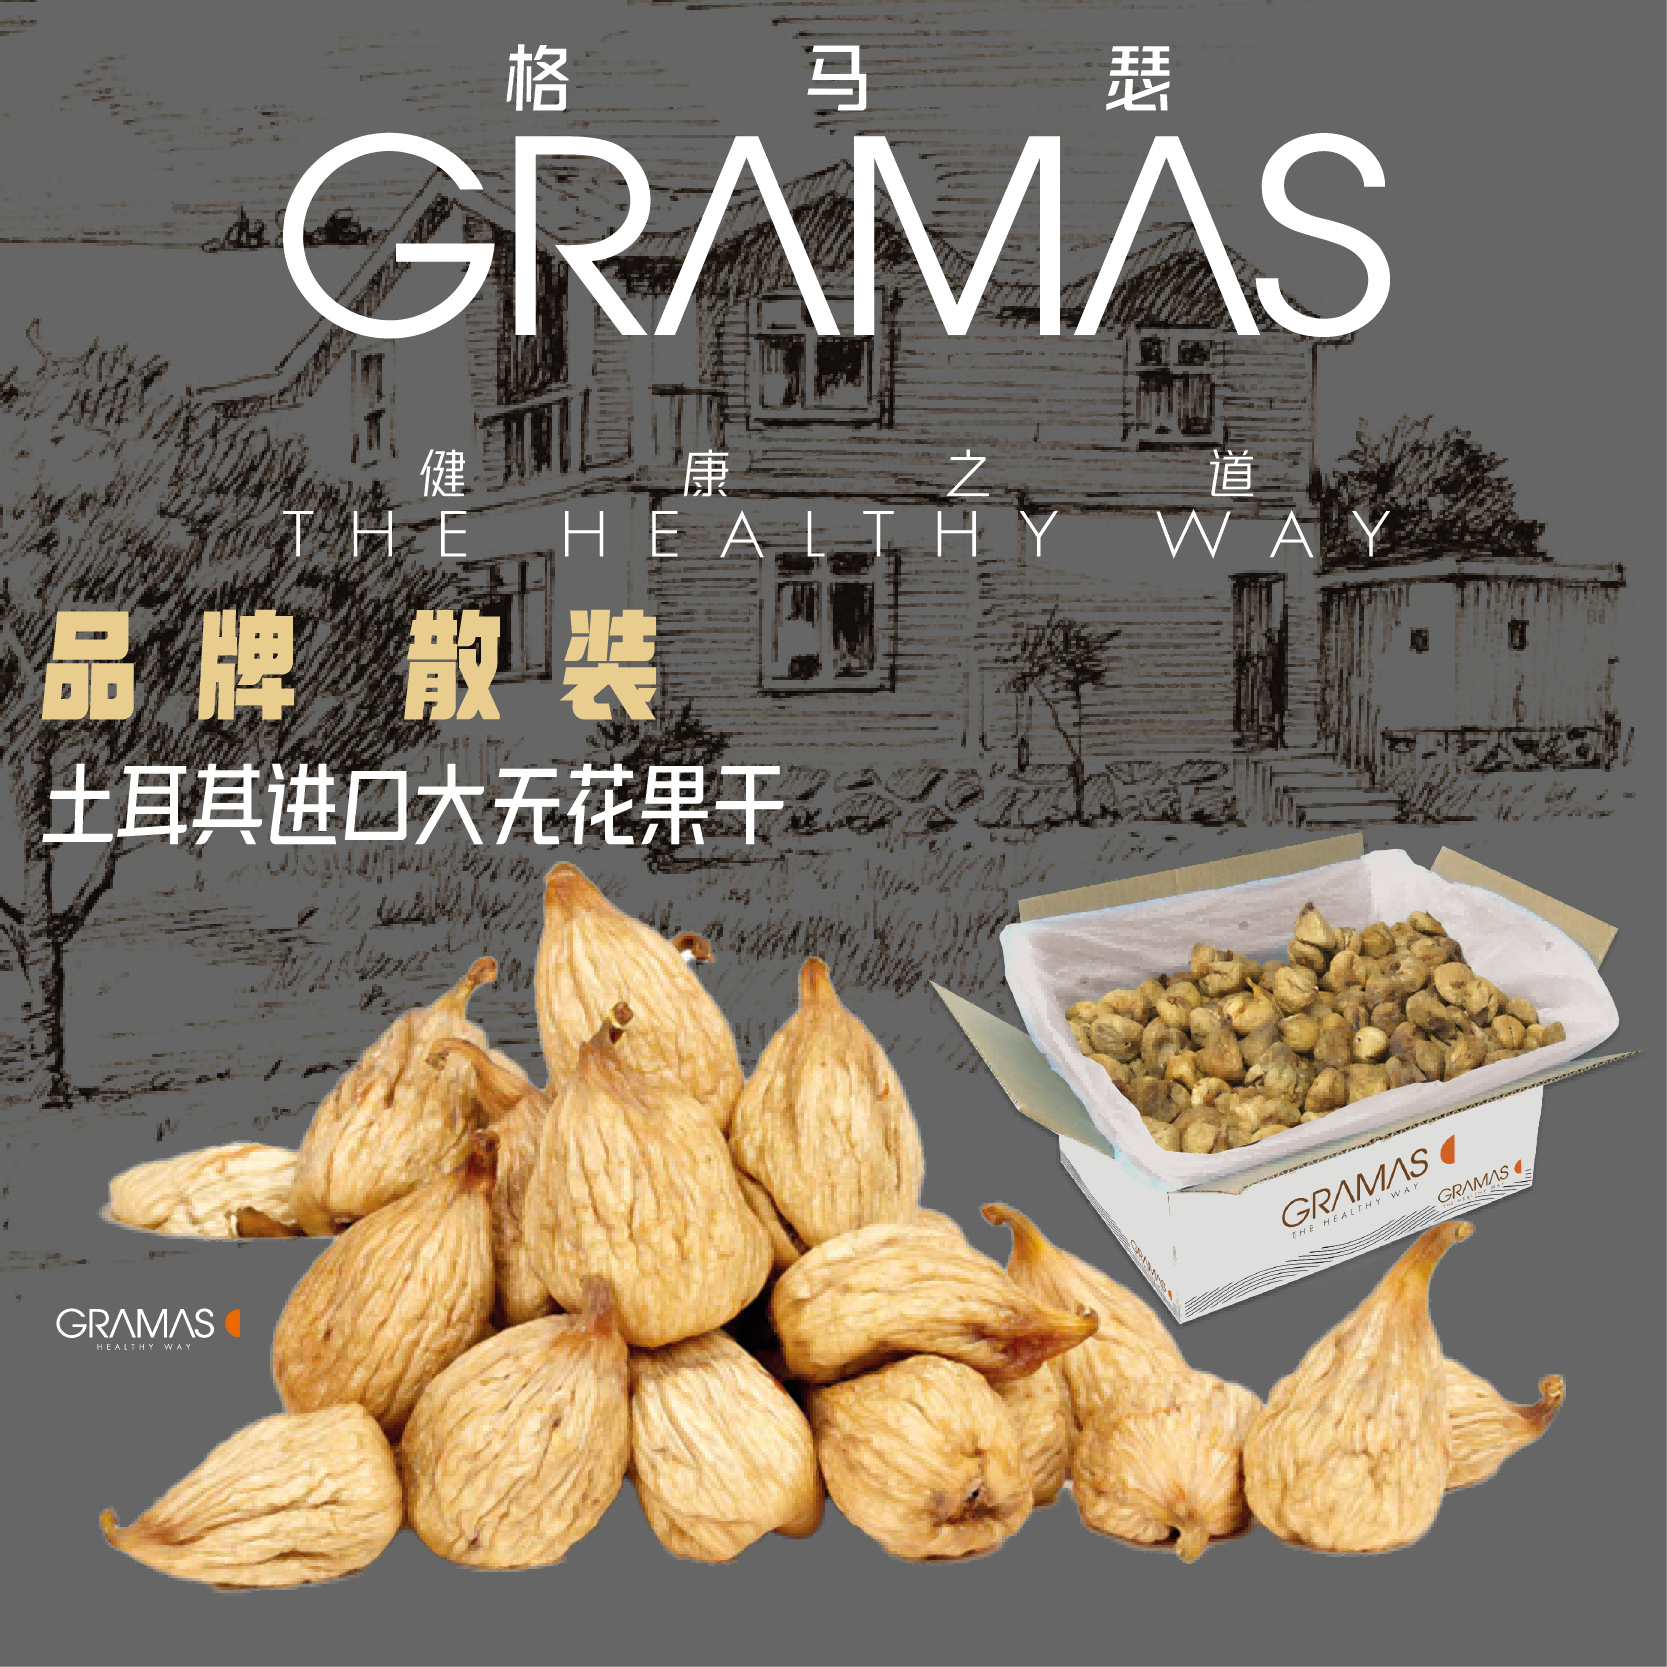 Large dried figs, closed bulk, imported from Türkiye with original packaging GRAMAS, 10kg whole box, wholesale preserved snacks